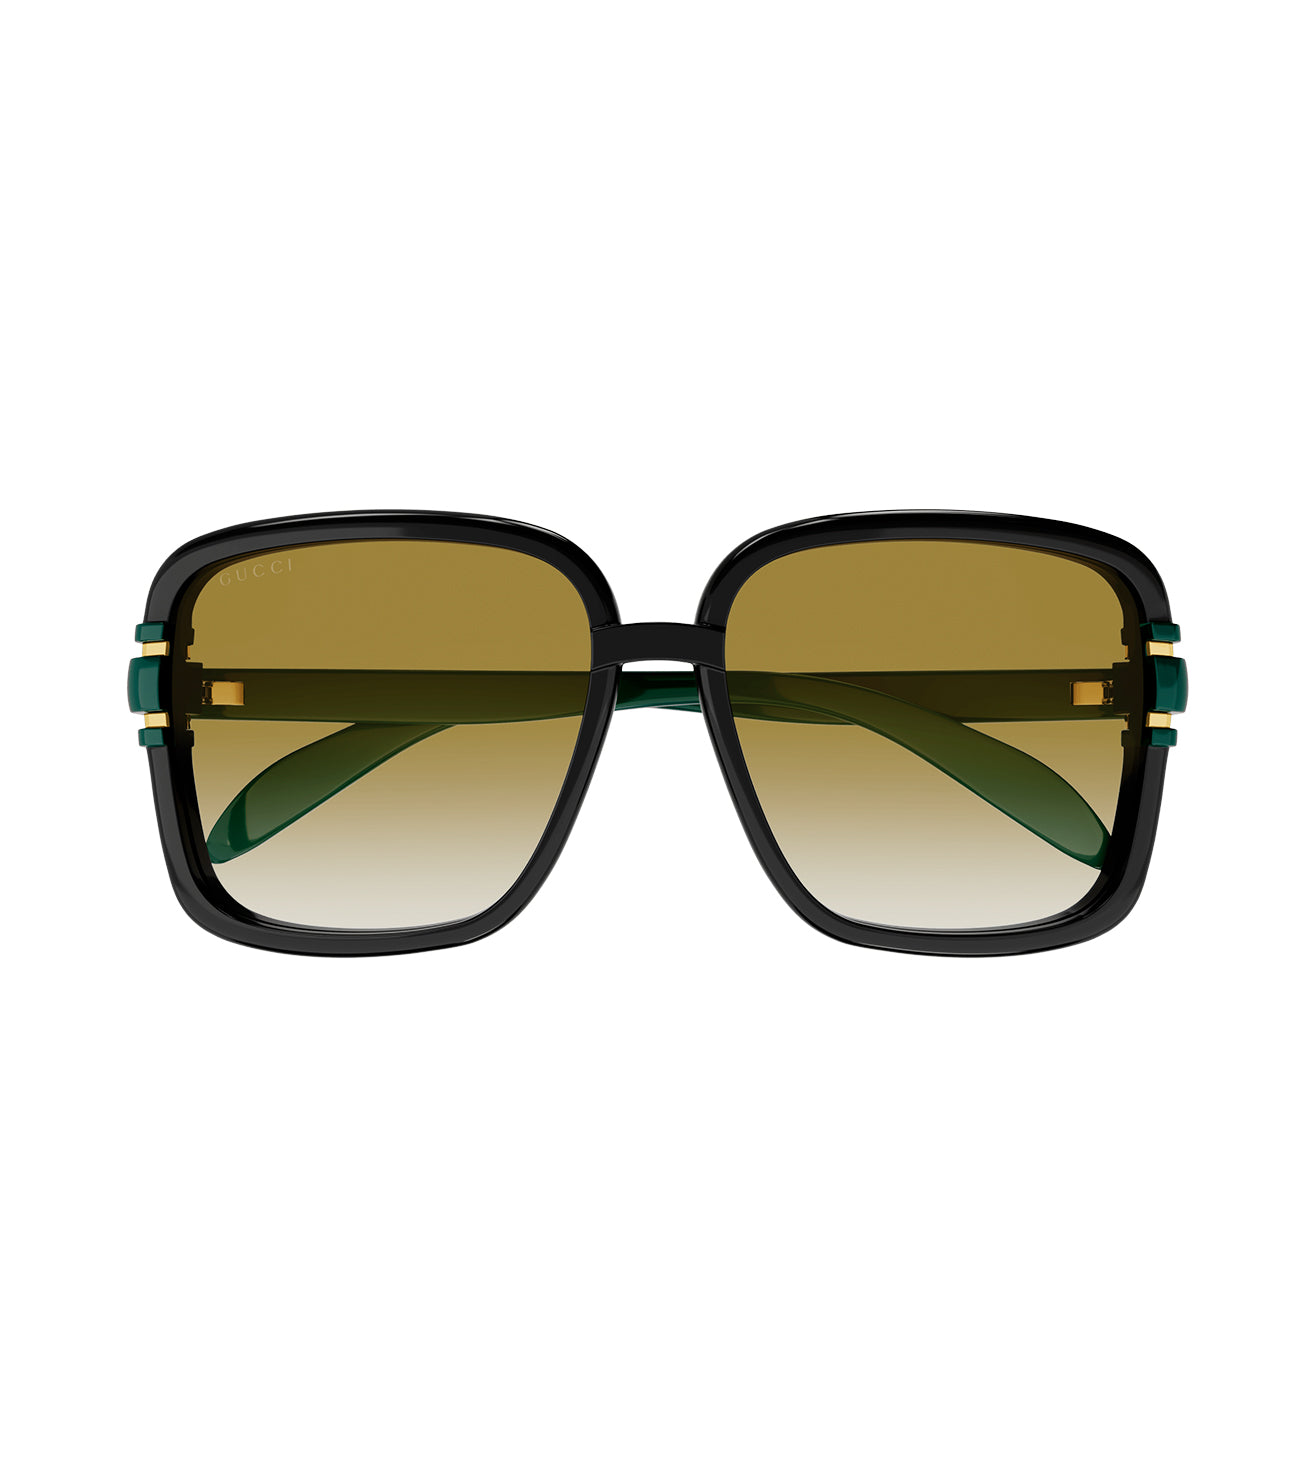 Gucci Women's Brown Butterfly Sunglasses